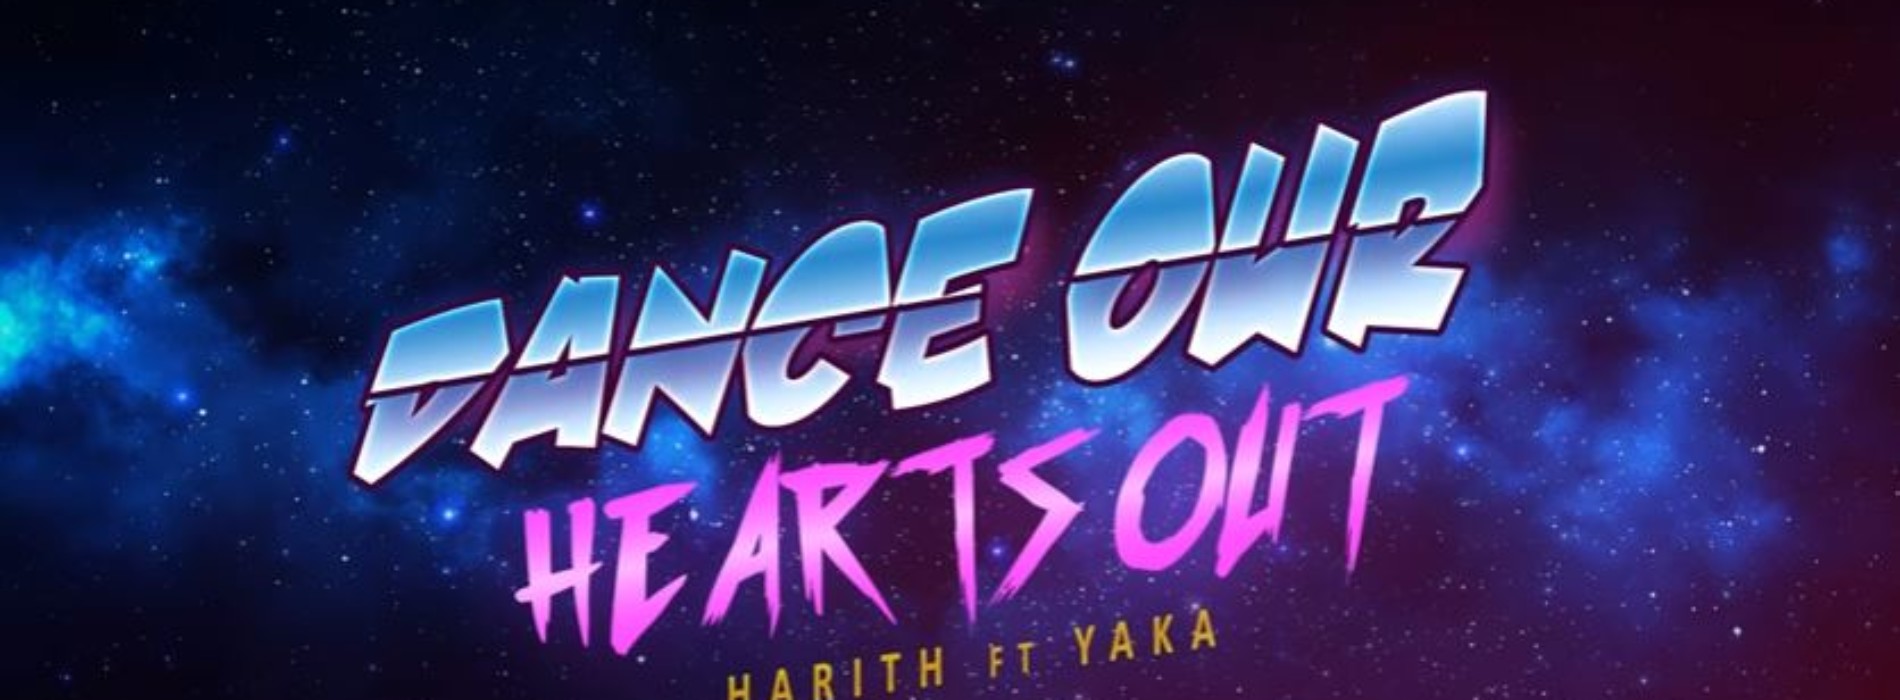 Harith Ft Yaka : Dance Our Hearts Out